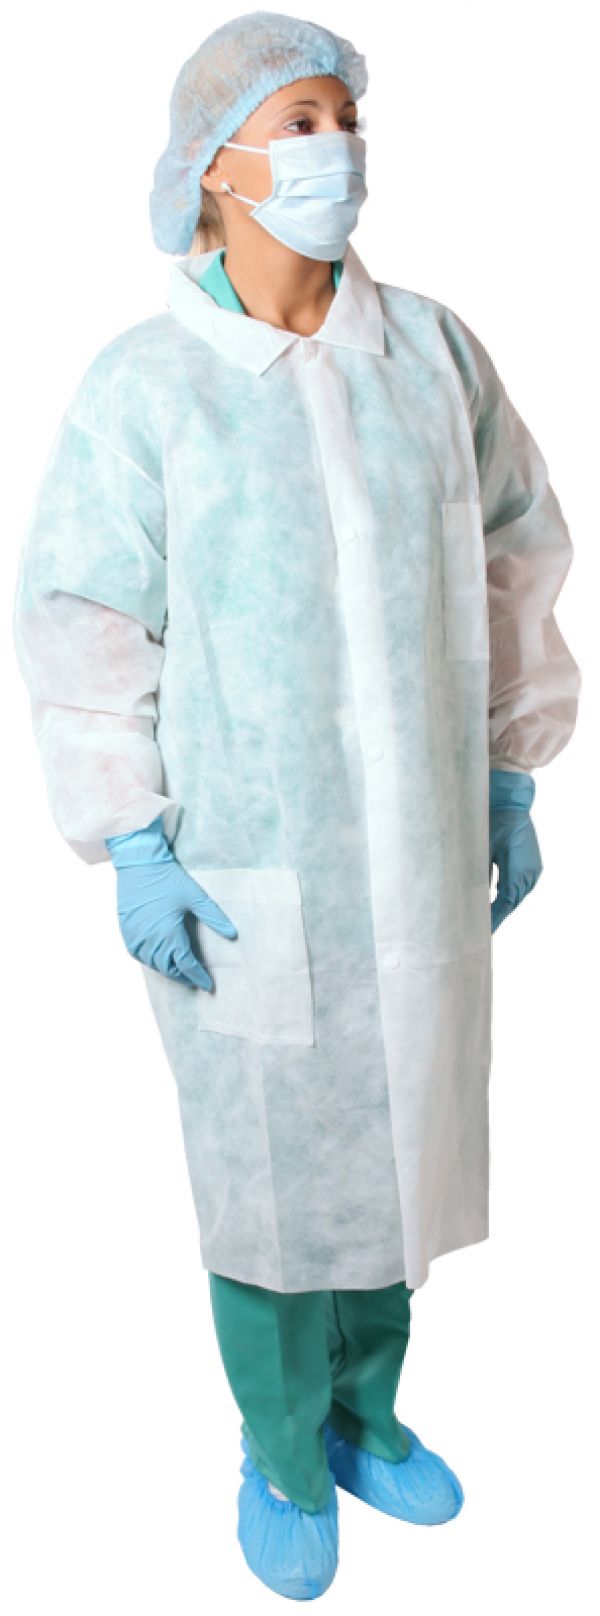 non woven surgical drapes and gown